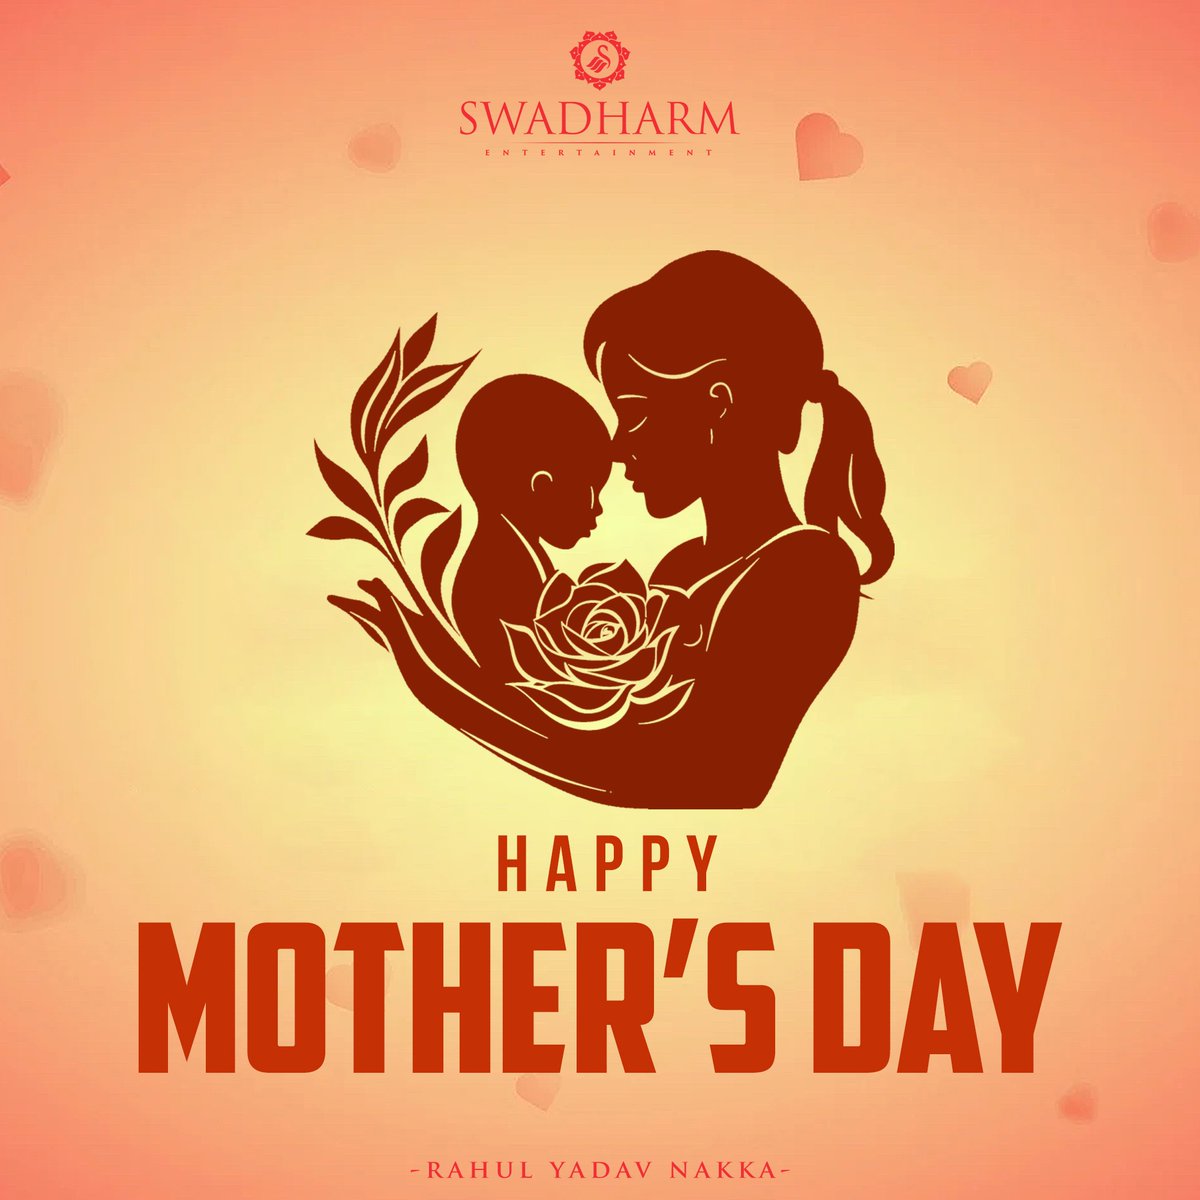 To the woman who shaped my world with love and sacrifice, Happy Mother's Day! Your unwavering support and endless kindness are the pillars of my life. Today, and every day, I celebrate you. 💐 #MothersDay #HappyMothersDay @RahulYadavNakka